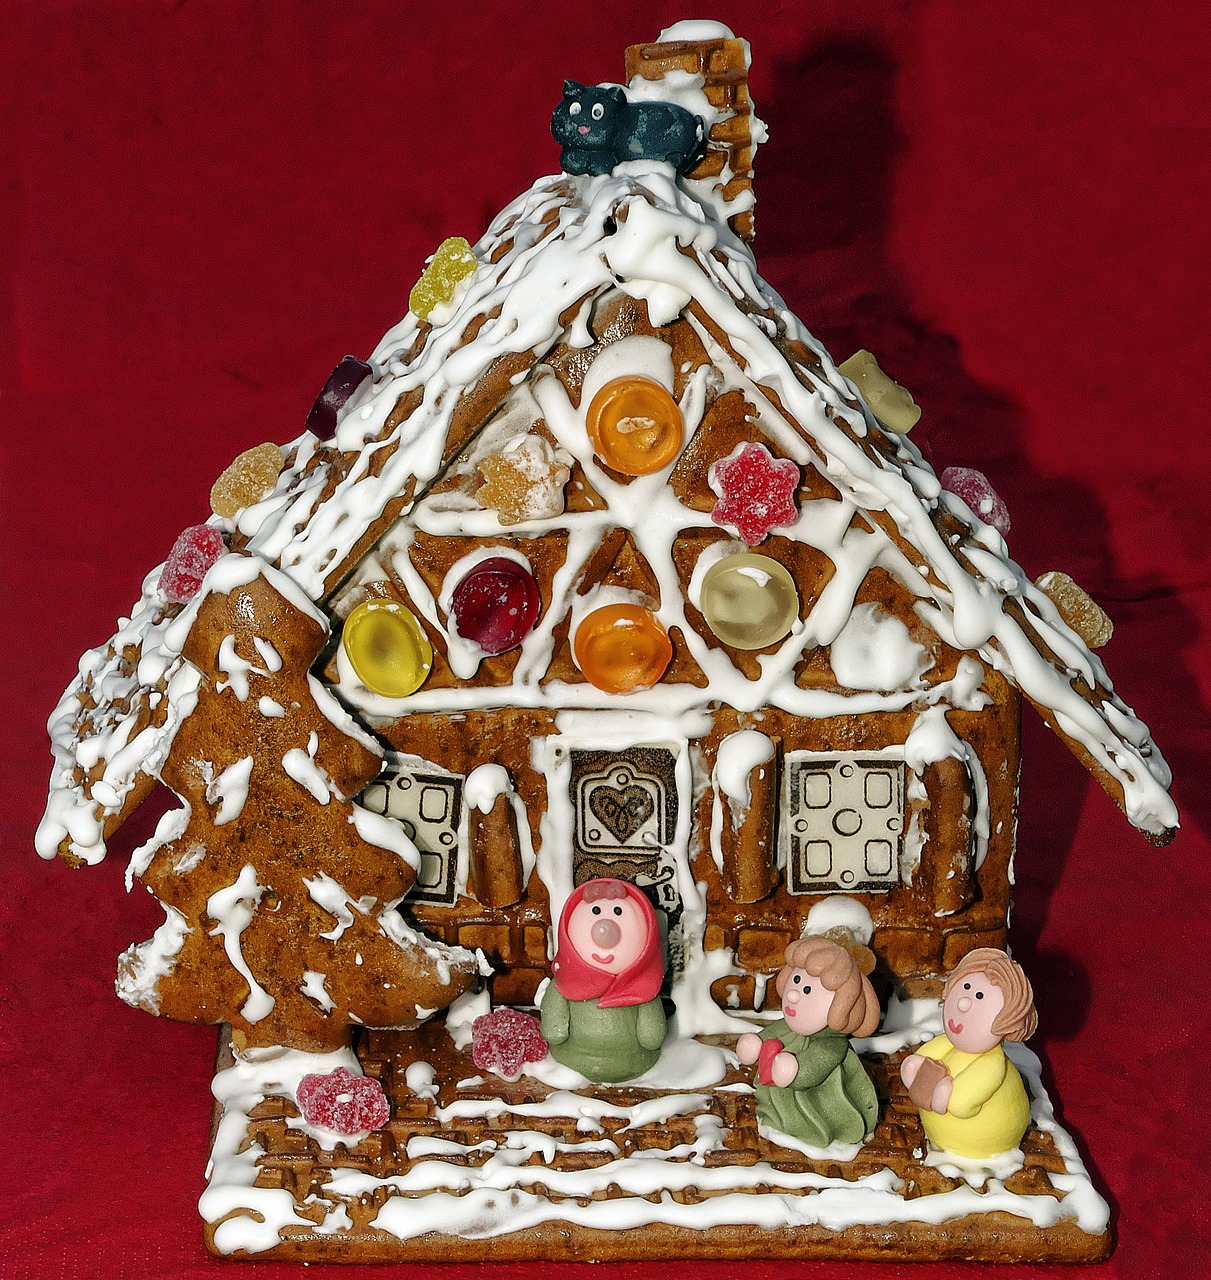 gingerbread house marzipan figures gingerbread free photo